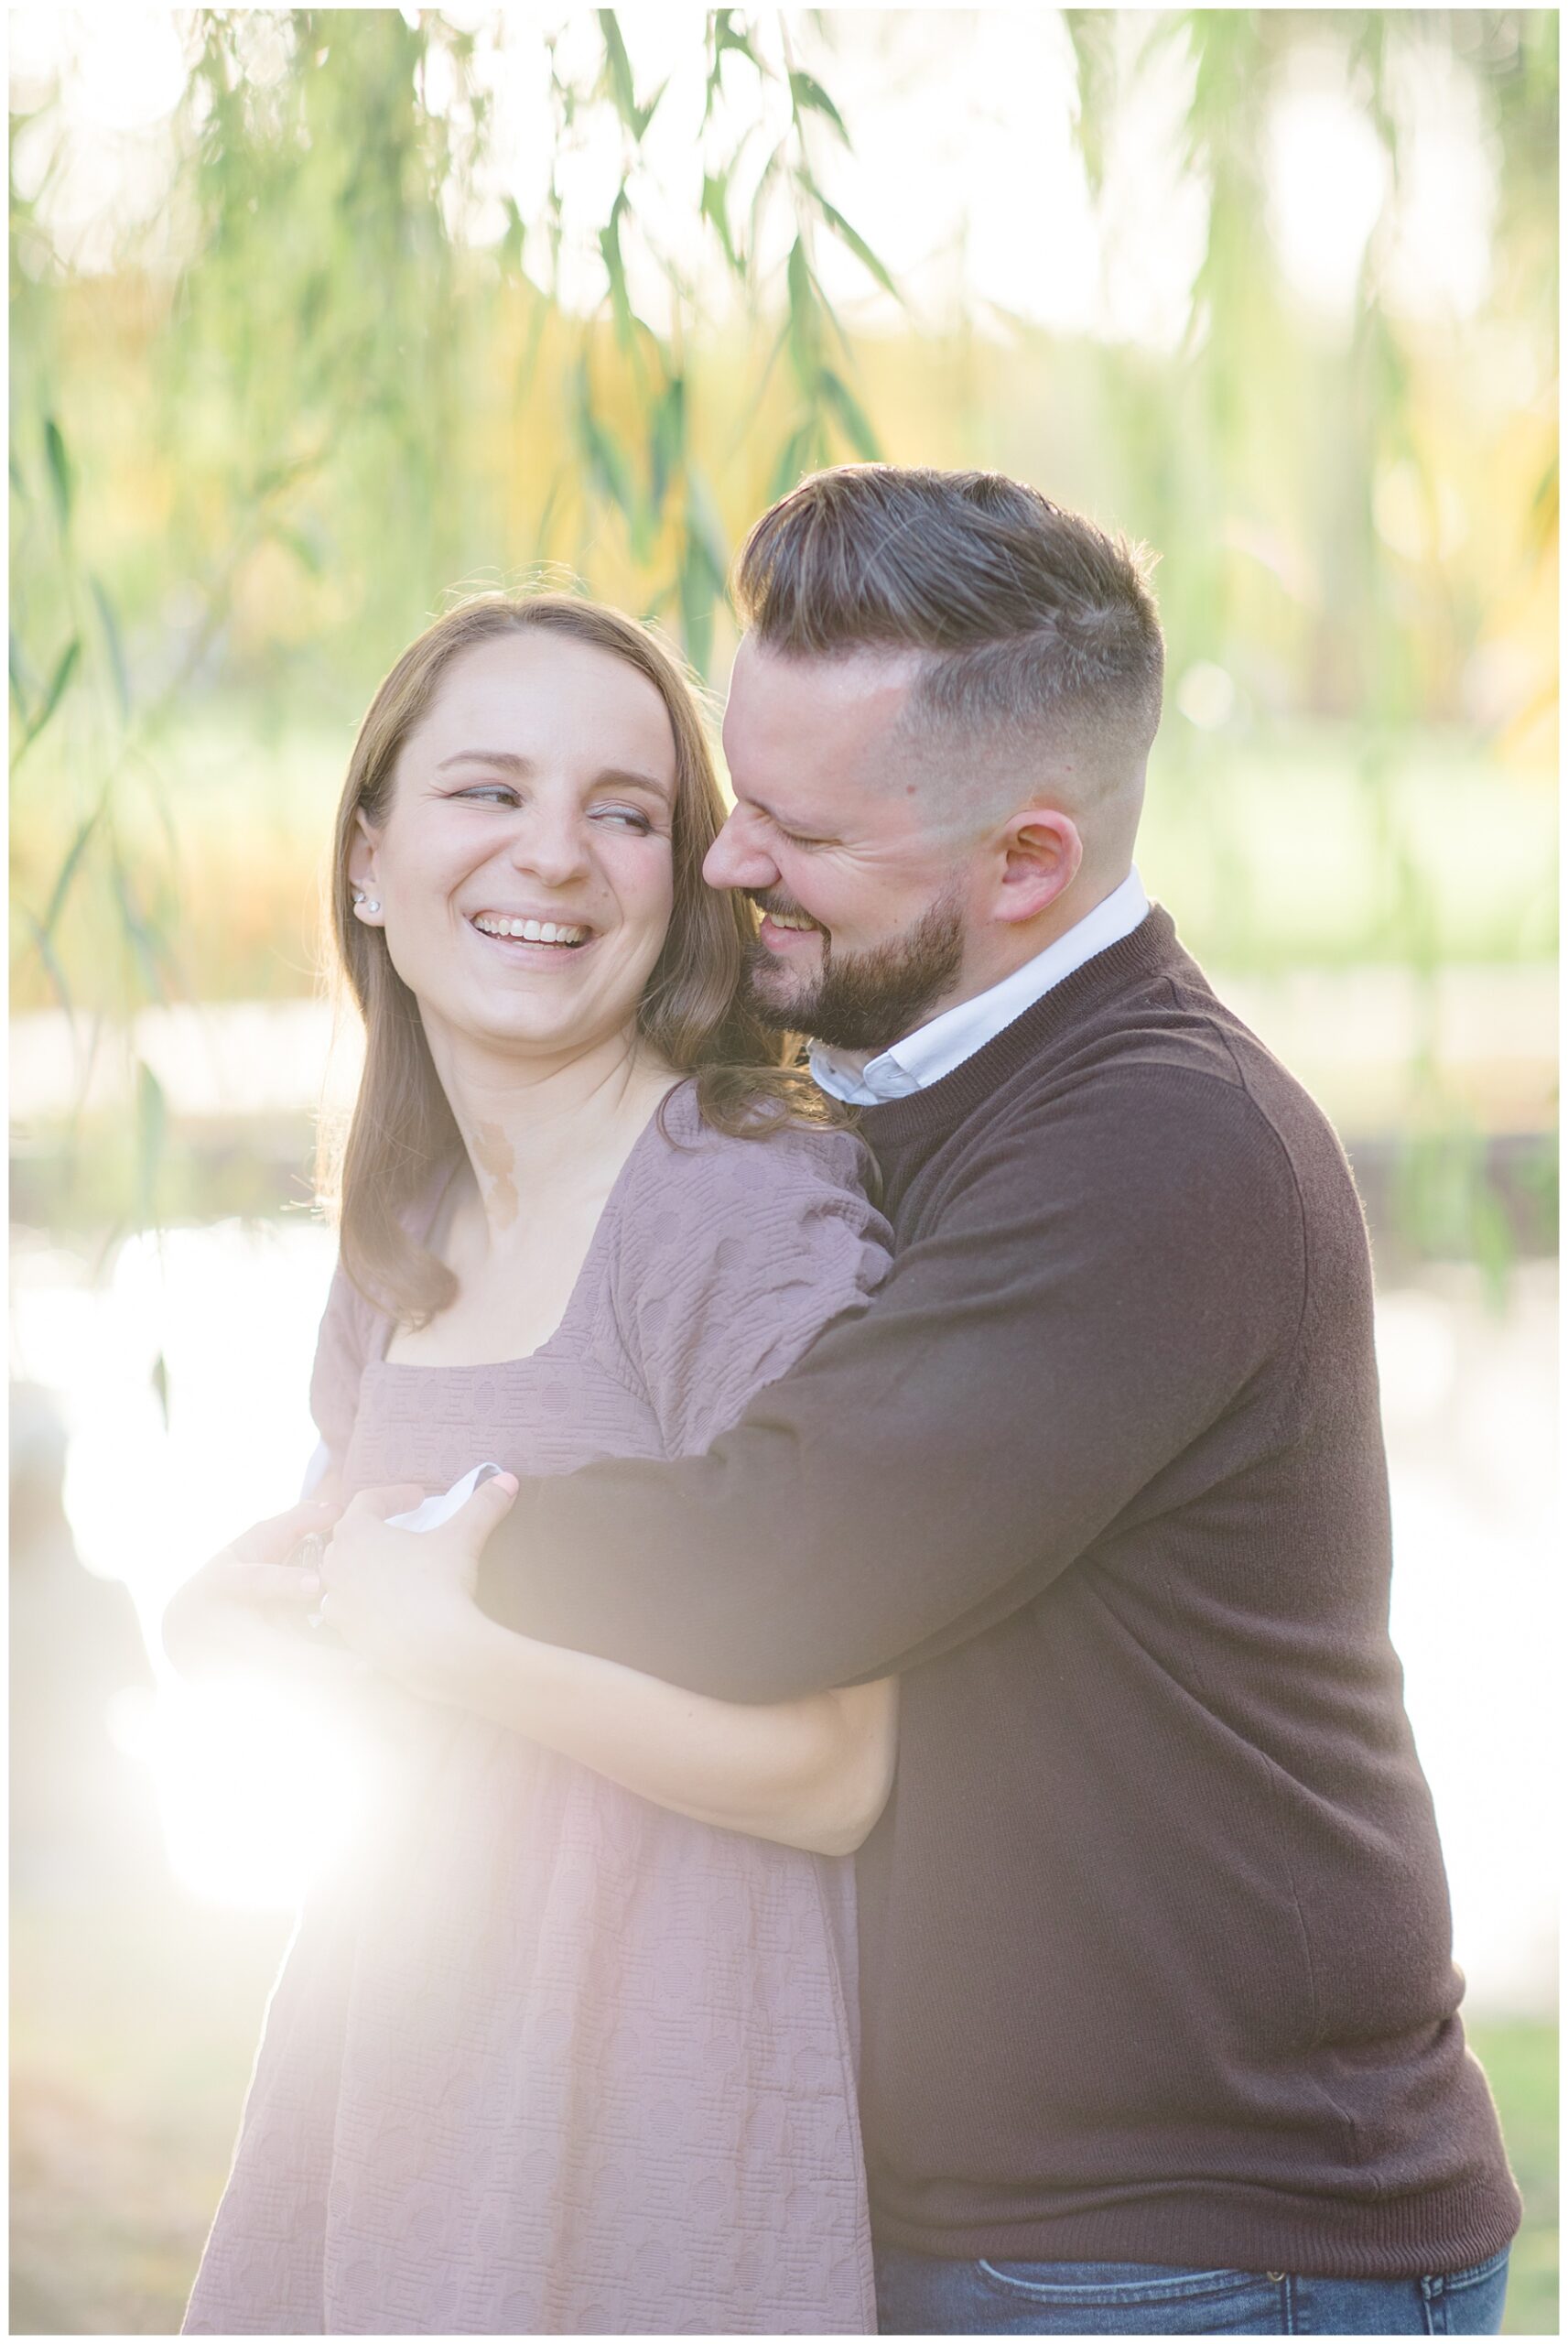 romantic engagement portraits in Boston under weeping Willow tree